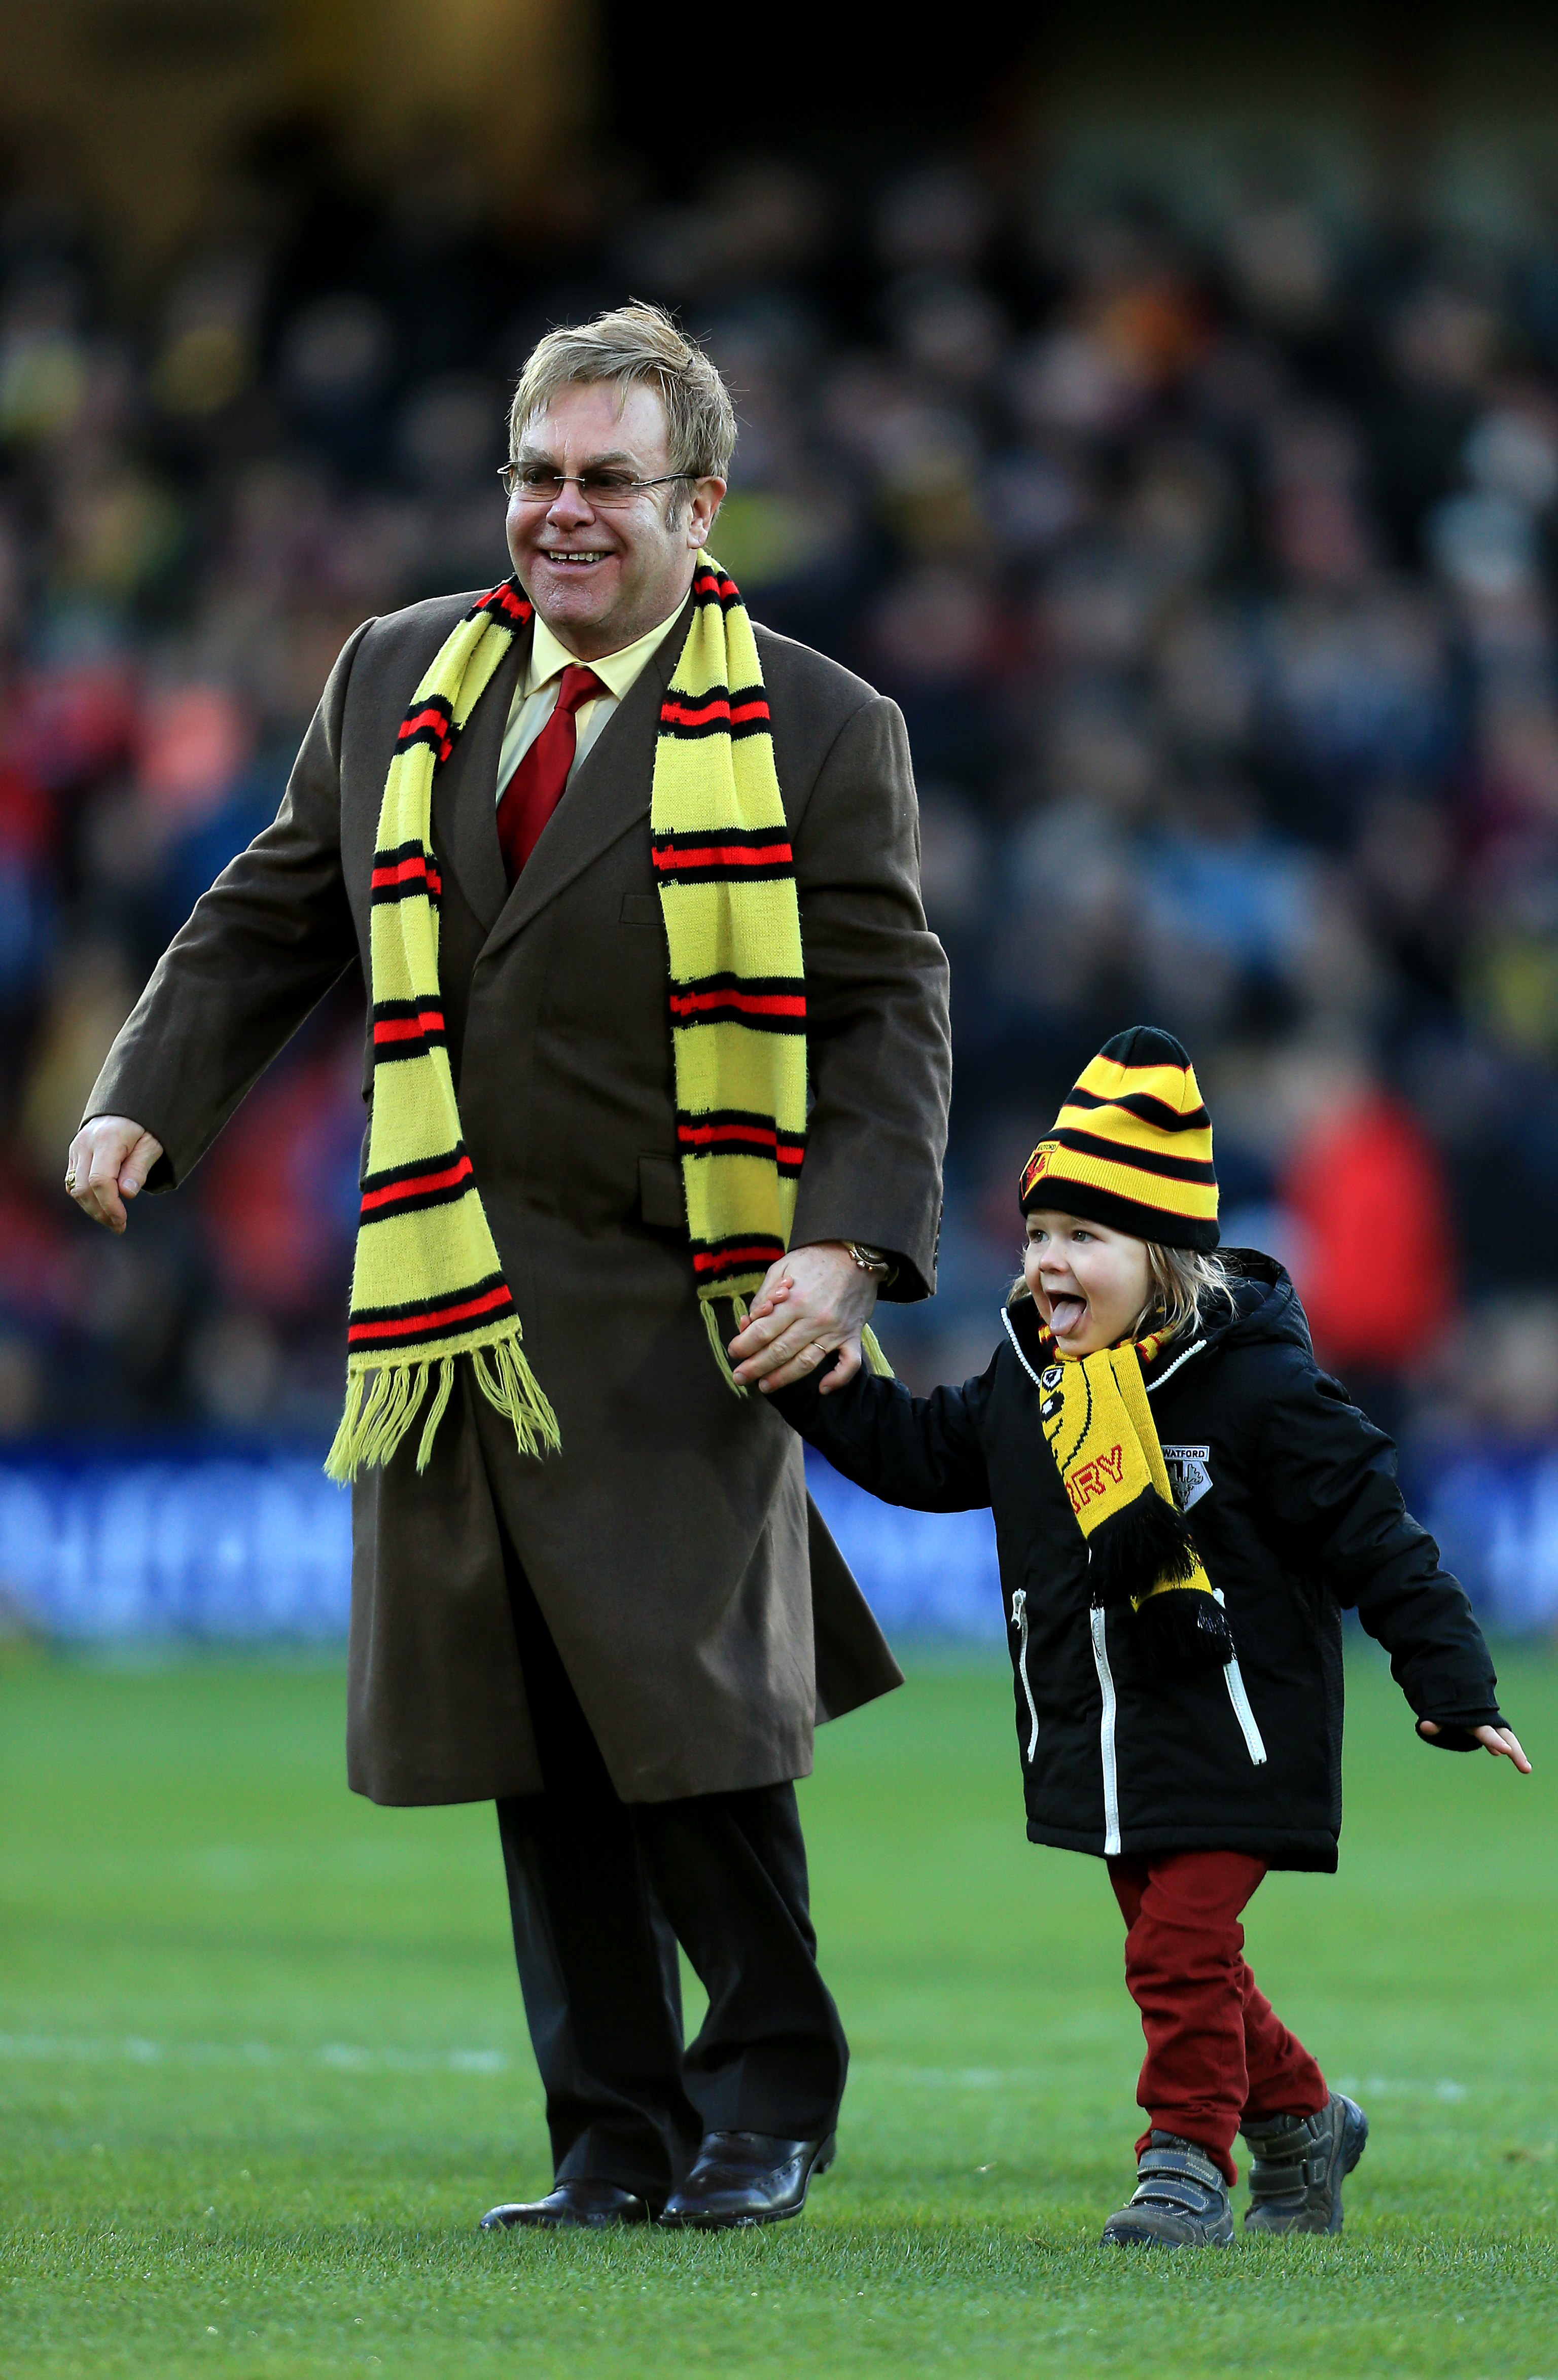 elton and his son walking on a soccer field